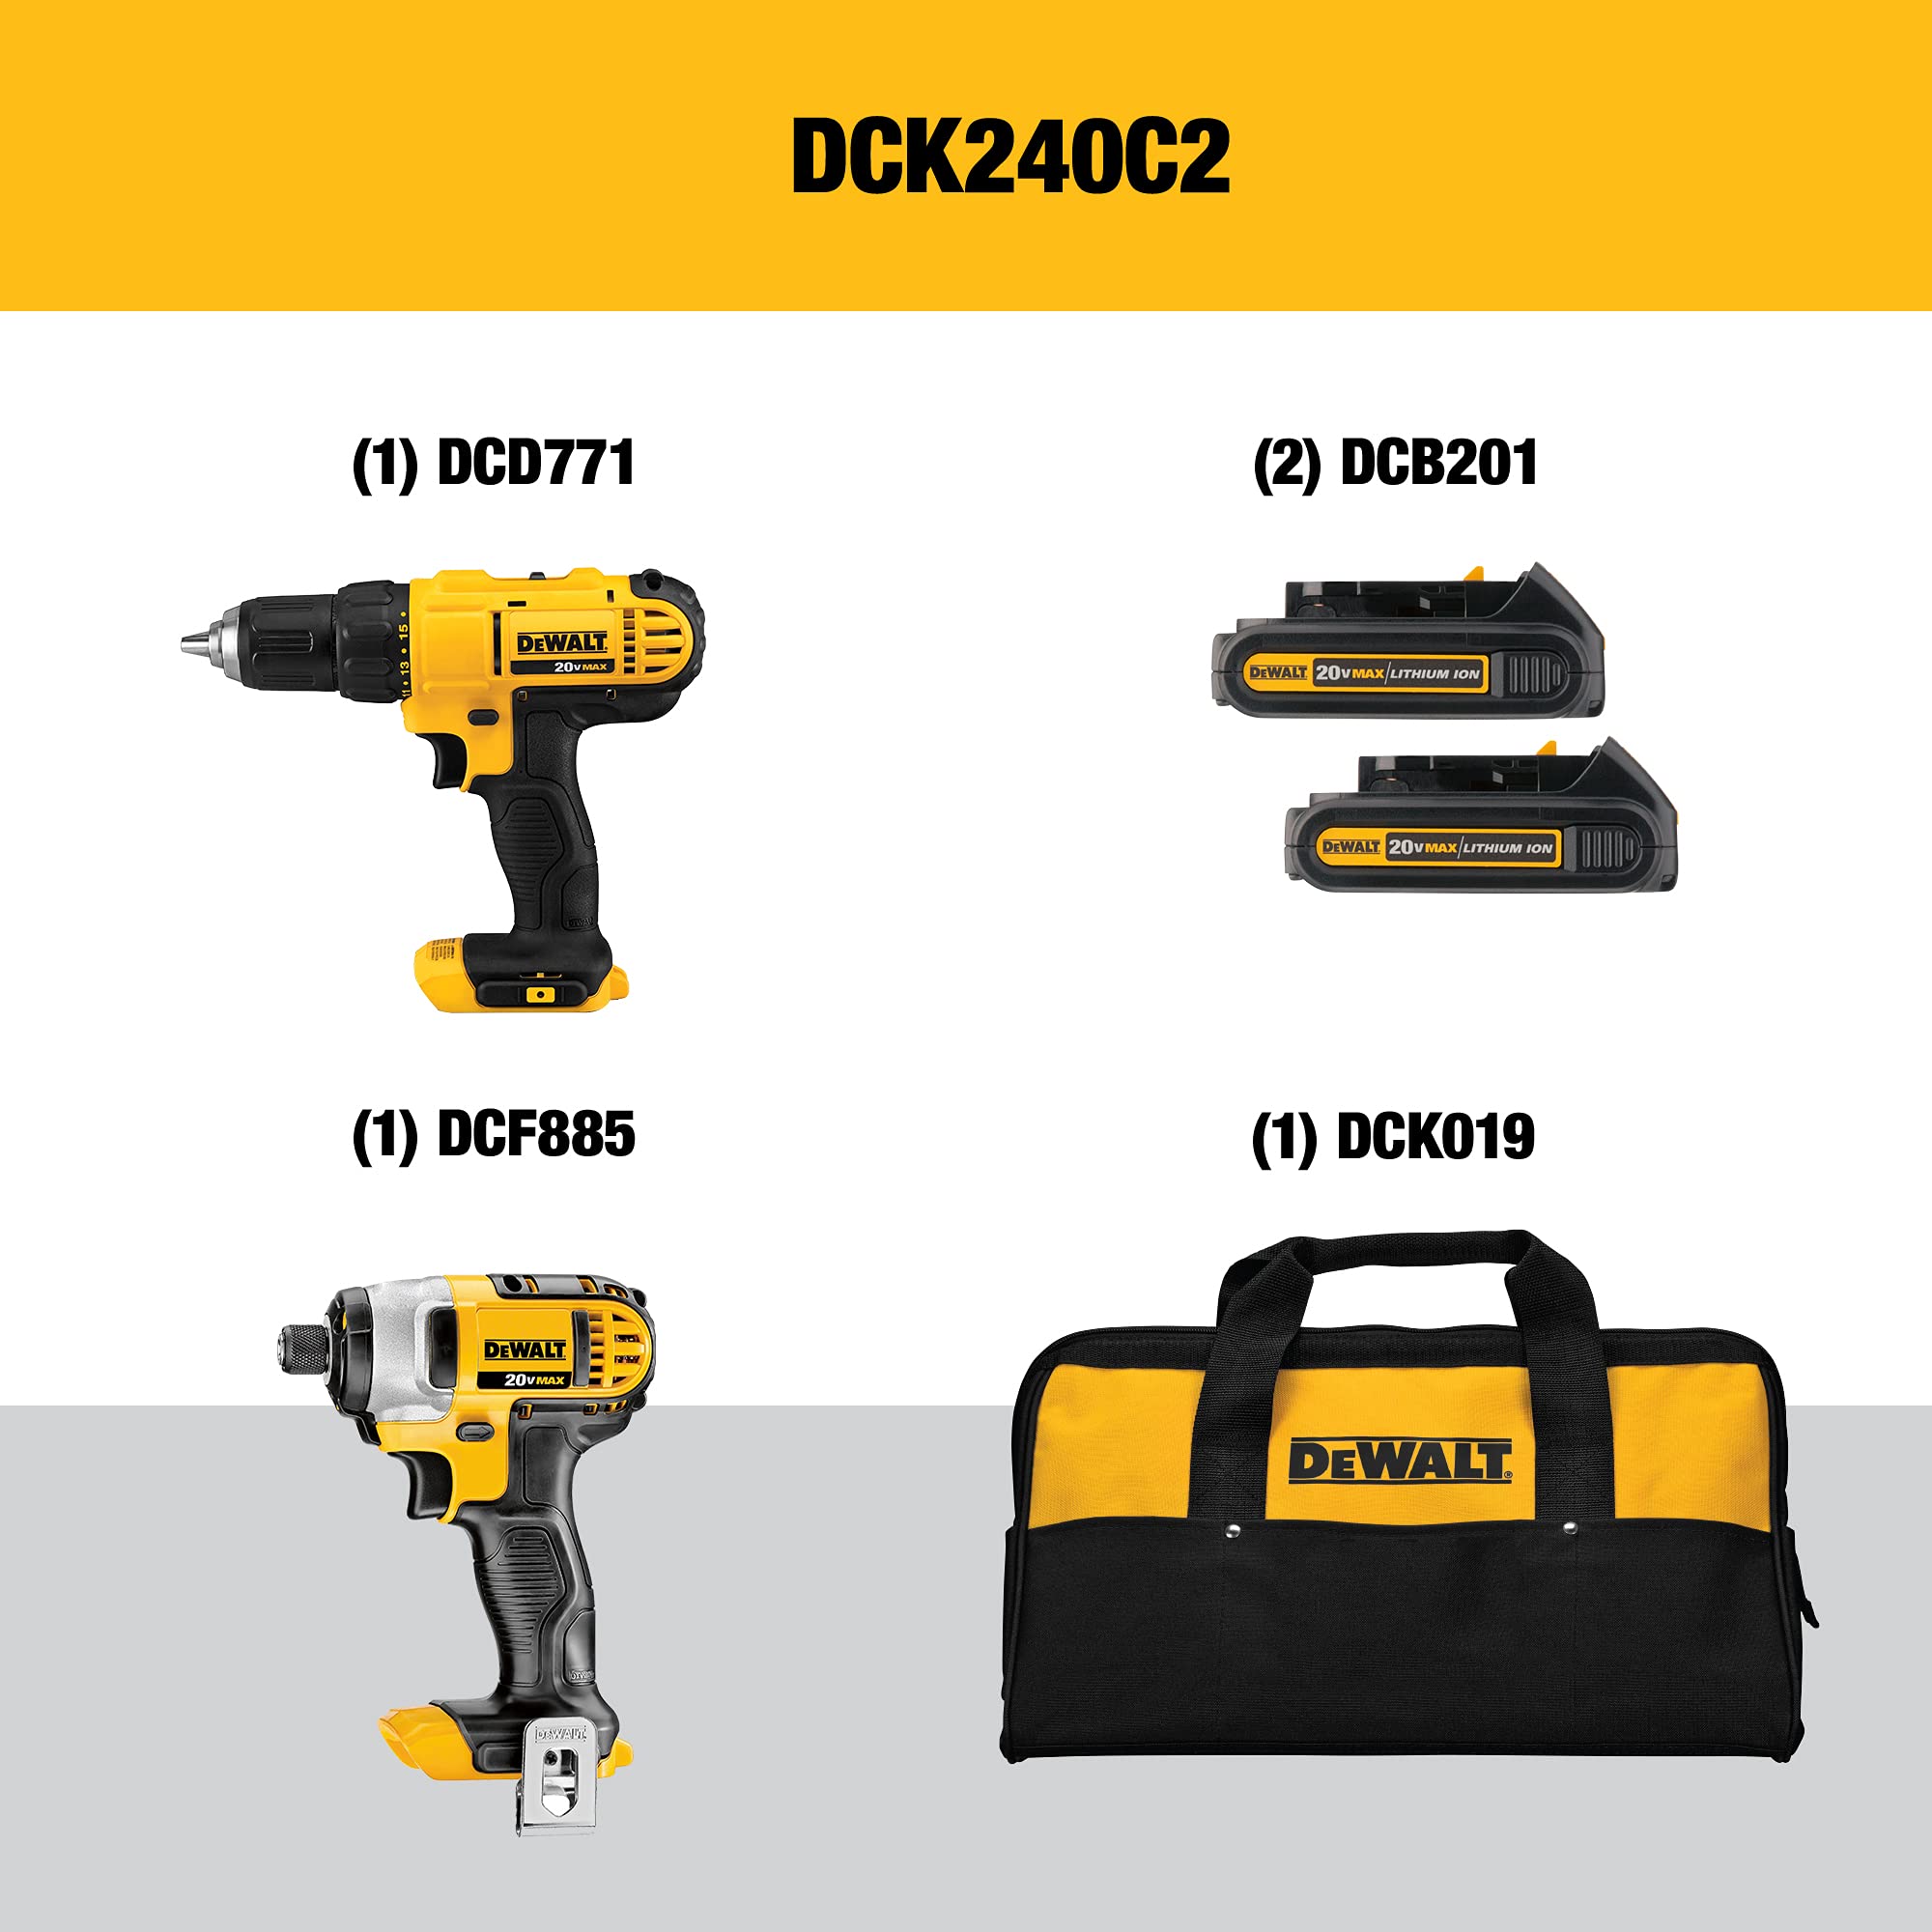 DEWALT 20V MAX Cordless Drill and Impact Driver, Power Tool Combo Kit with 2 Batteries and Charger, Yellow/Black (DCK240C2) - $139.00